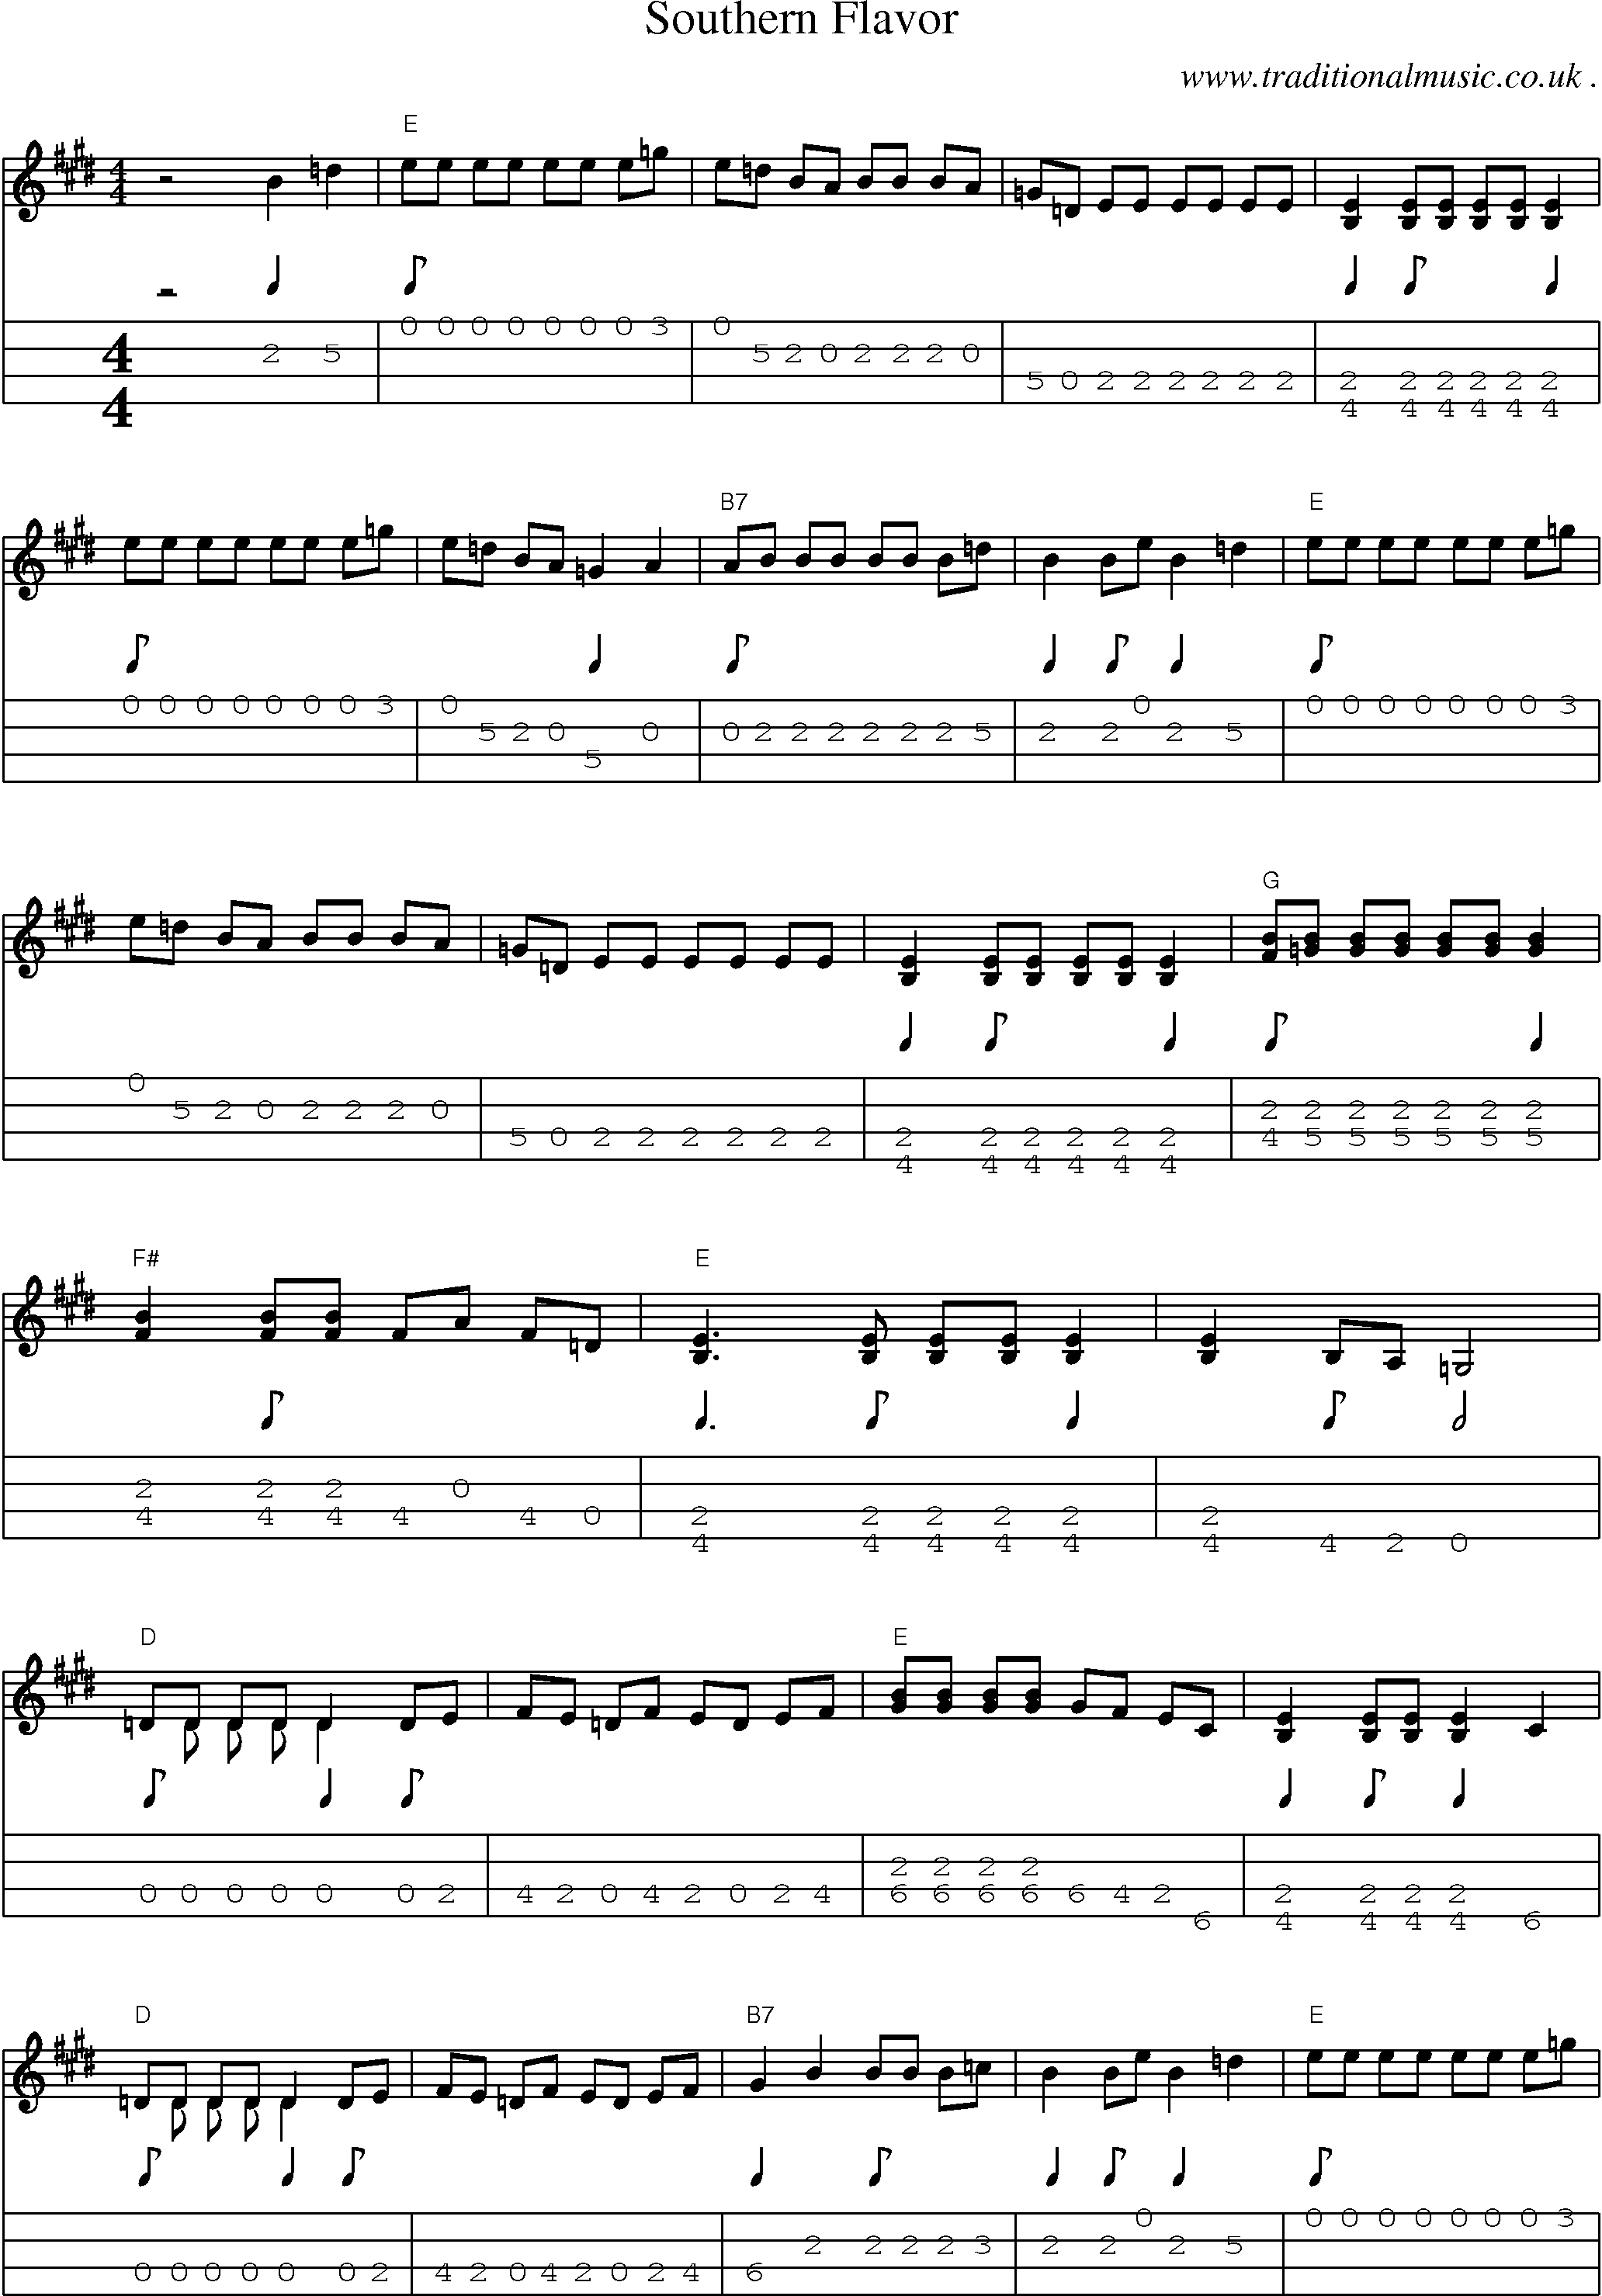 Music Score and Guitar Tabs for Southern Flavor